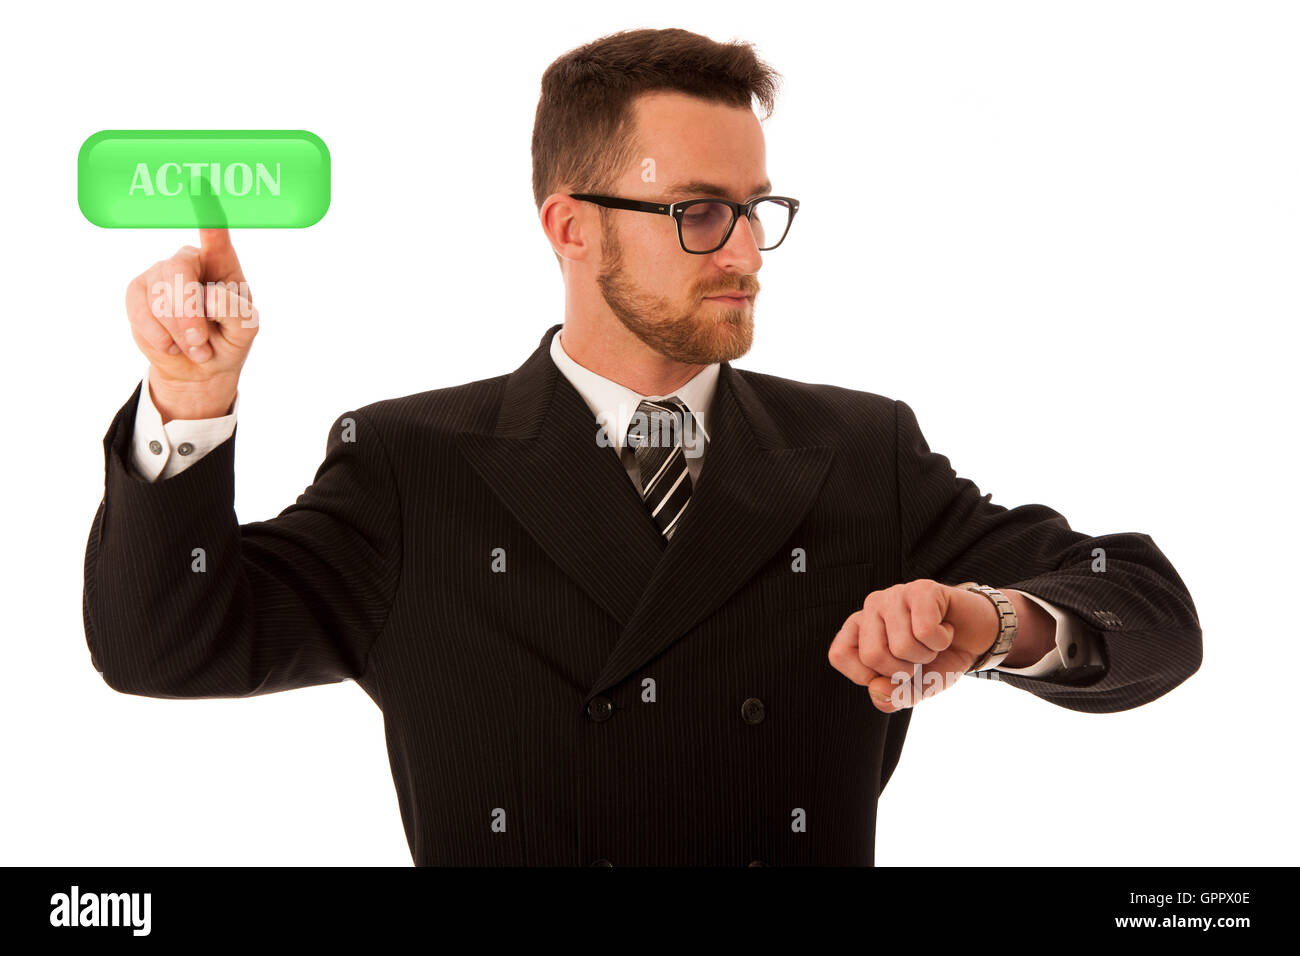 Happy young businessman in suit and tie presenting, promoting, advertising isolated over white. Time for action. Stock Photo